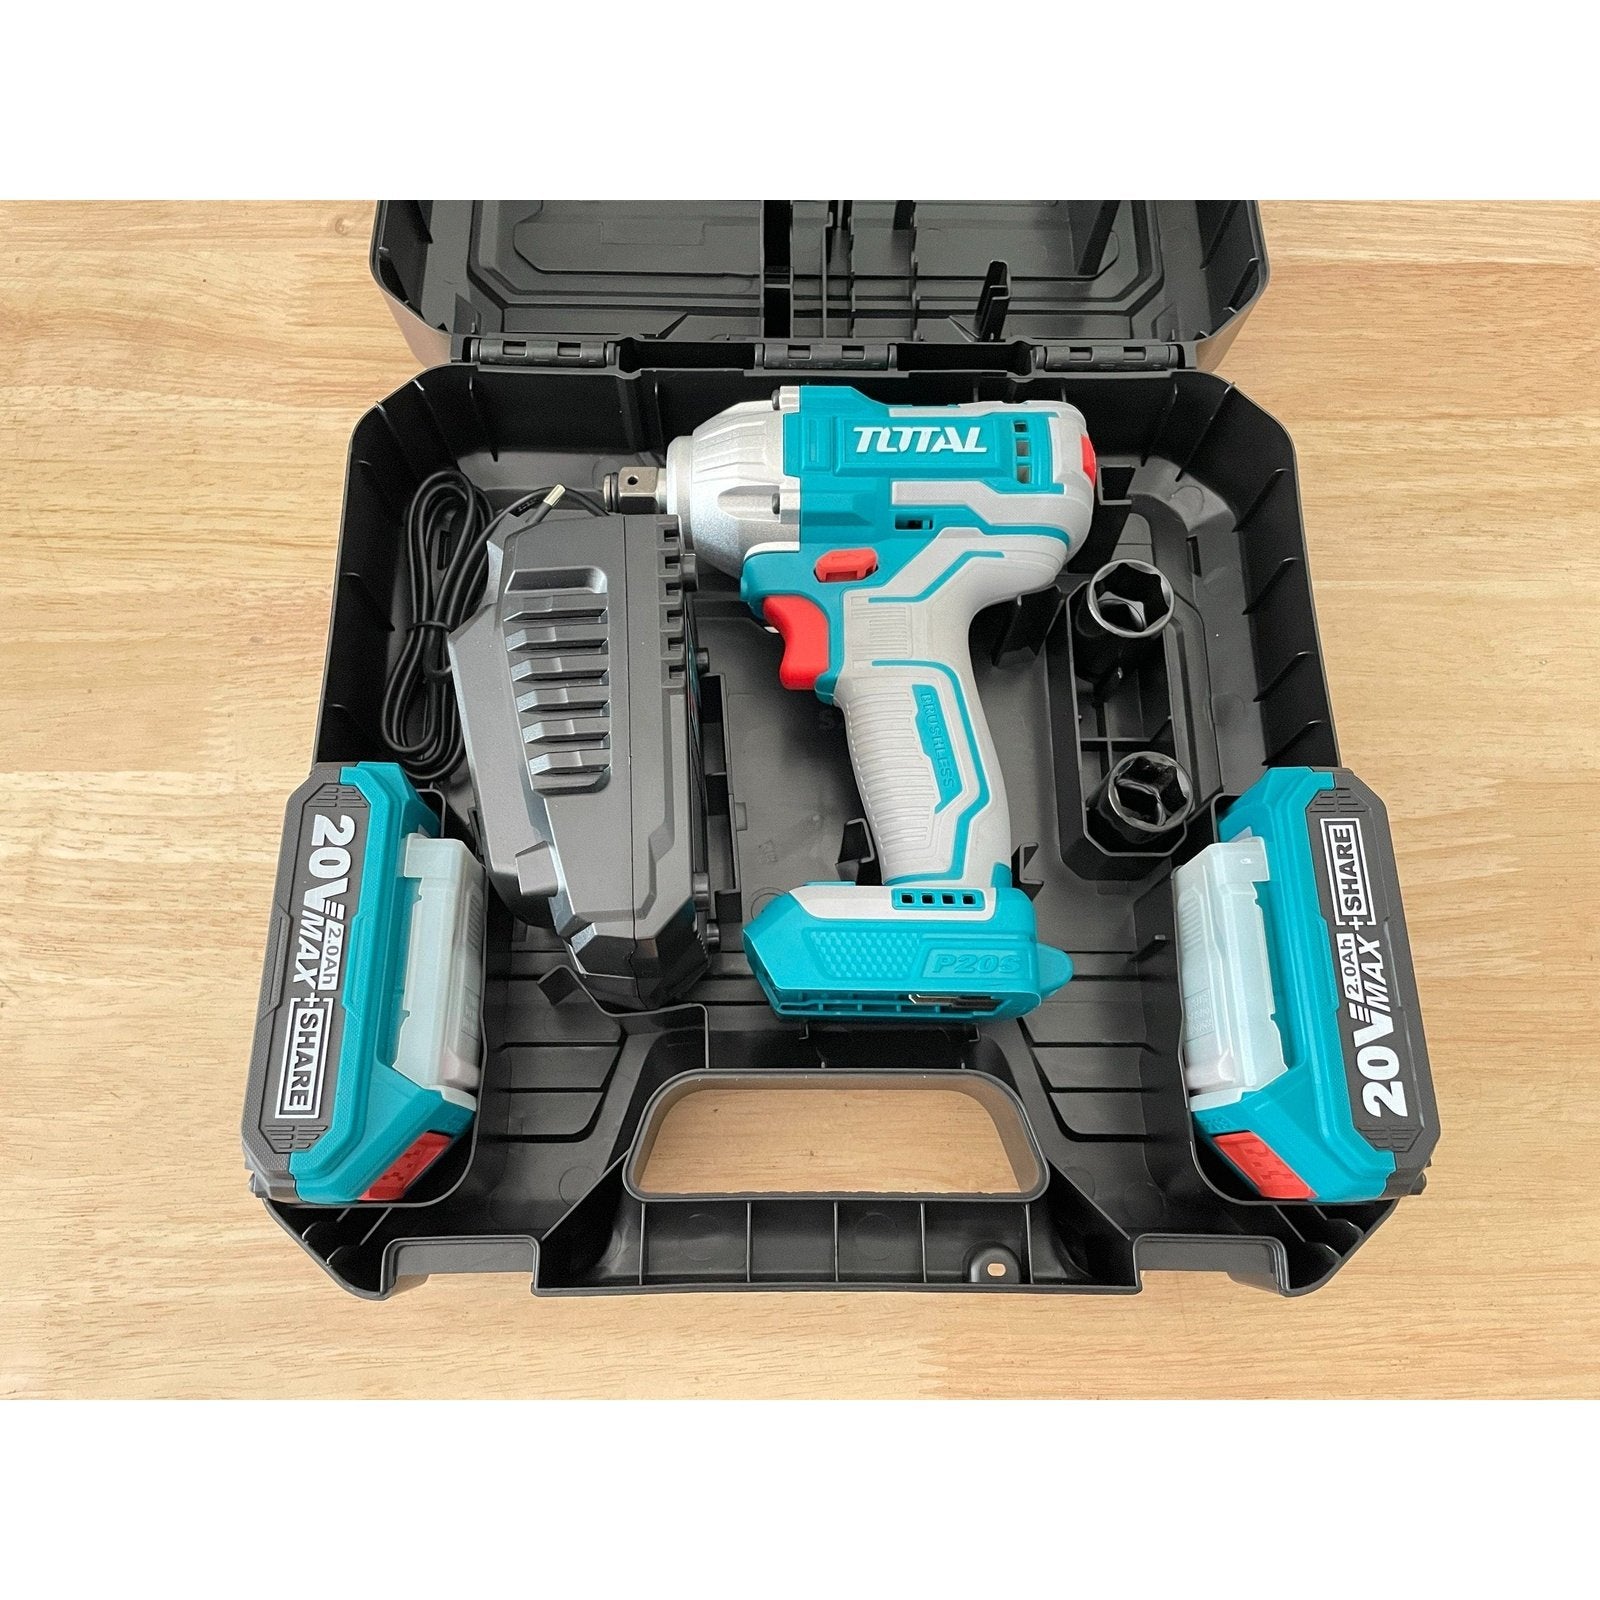 Total Lithium-Ion Cordless Impact Wrench - TIWLI2038 | Supply Master | Accra, Ghana Impact Wrench & Driver Buy Tools hardware Building materials